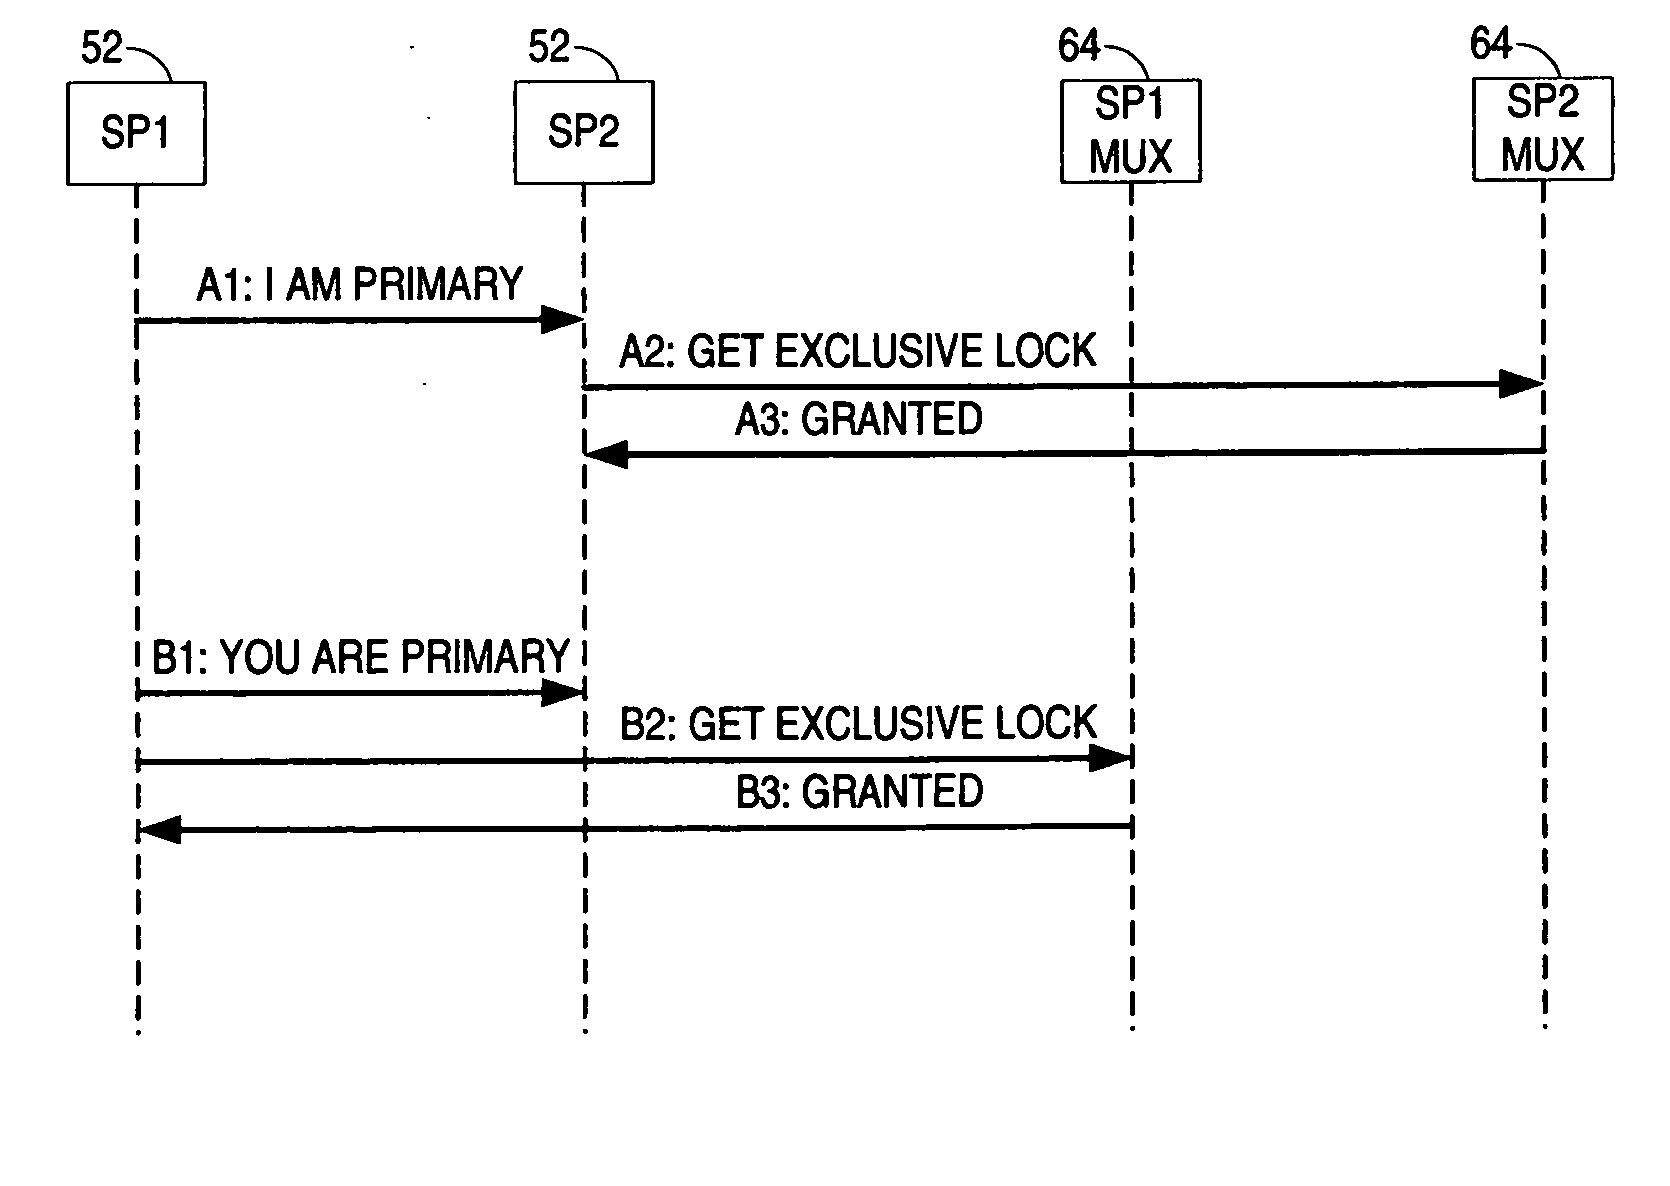 File-based access control for shared hardware devices